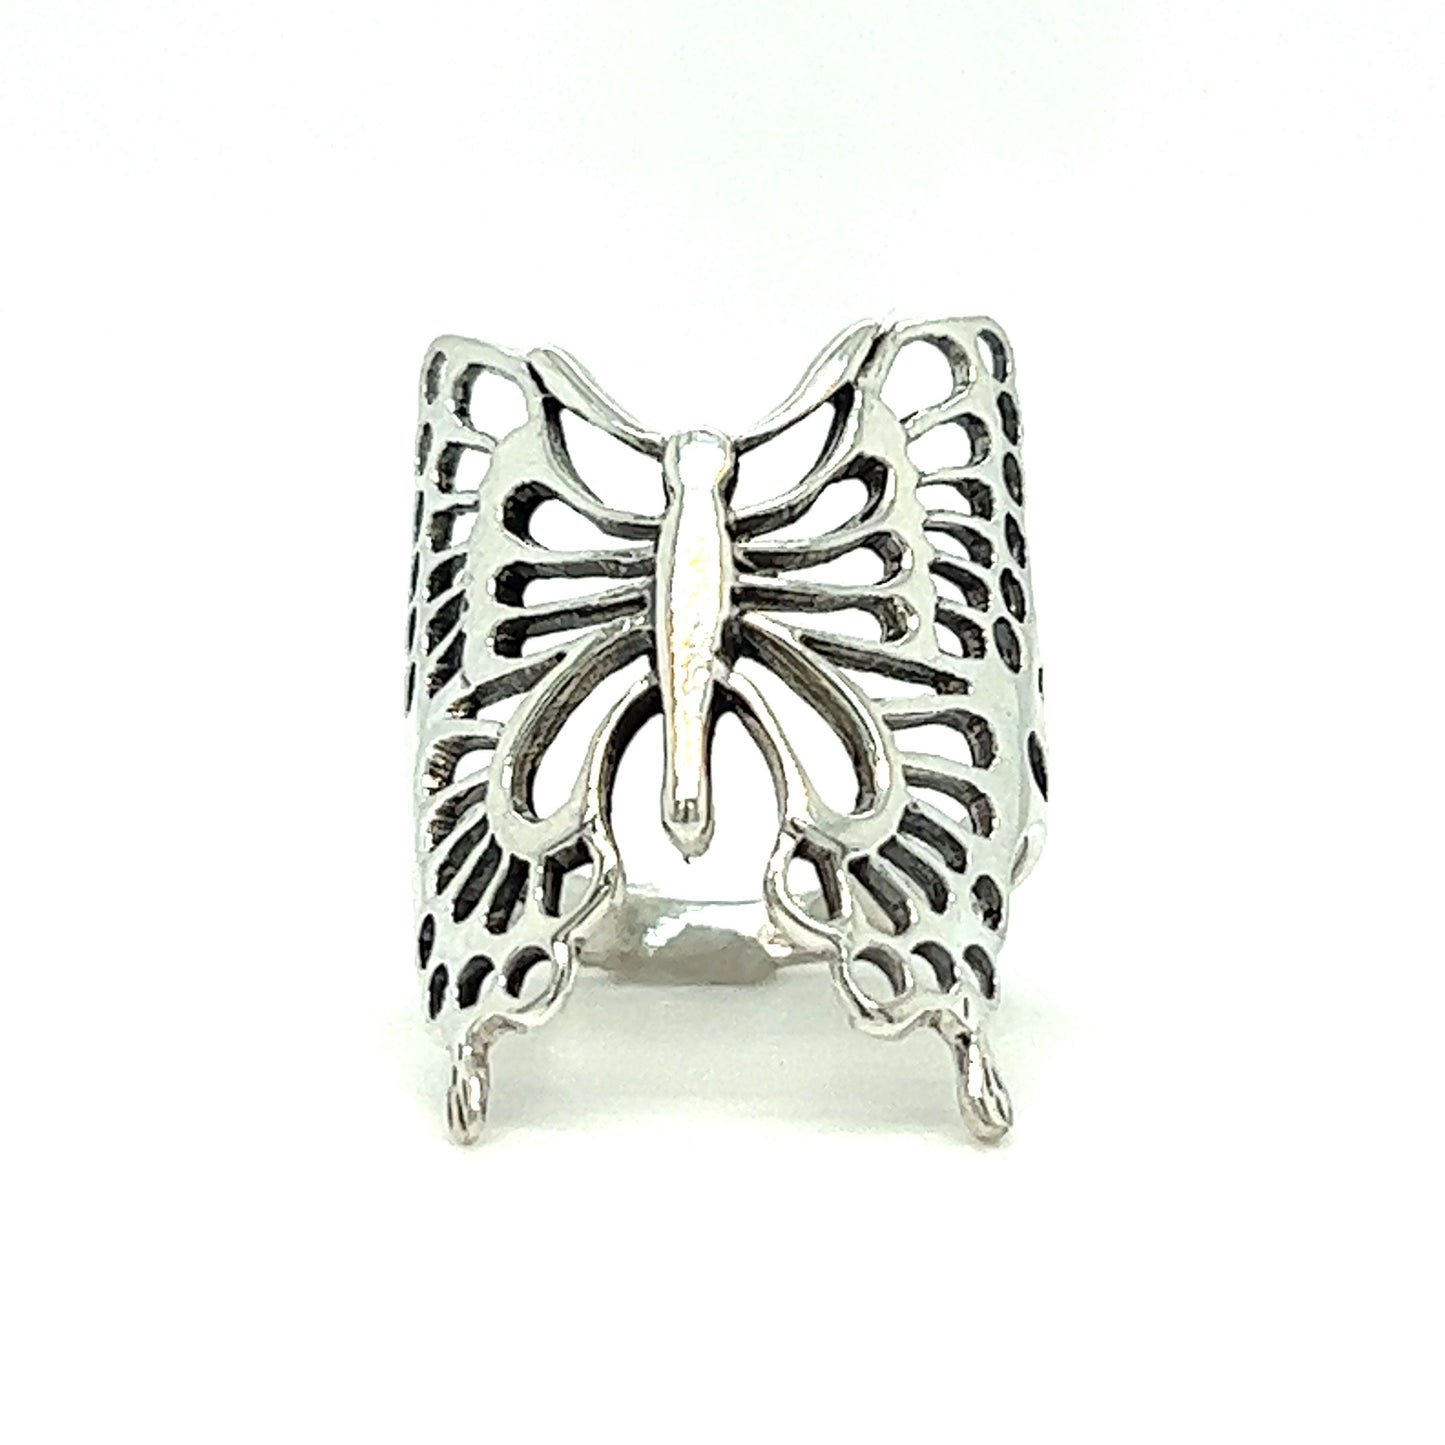 A minimalist Statement Butterfly Ring on a white background.